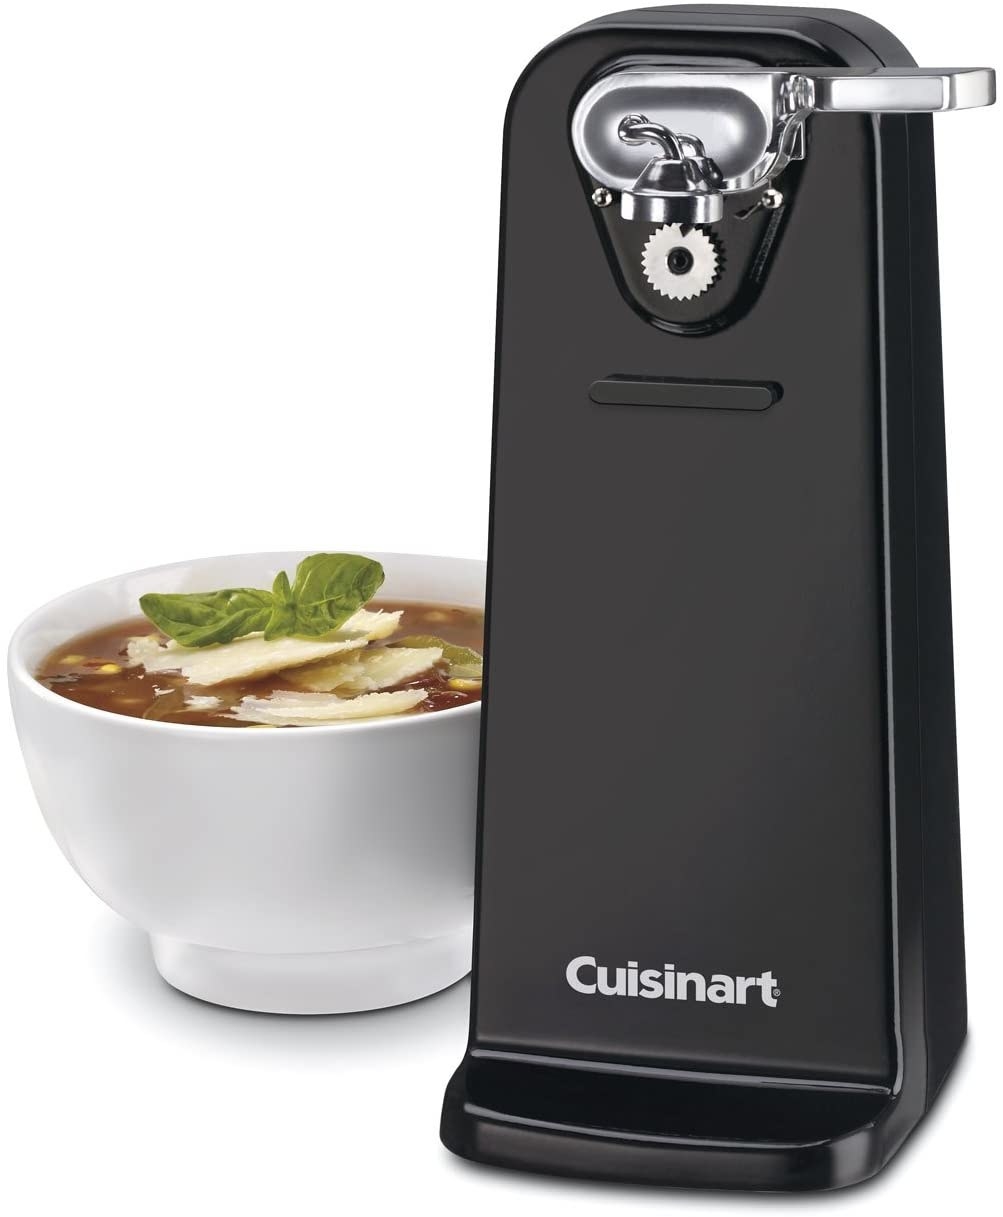 The electric can opener next to a bowl of soup